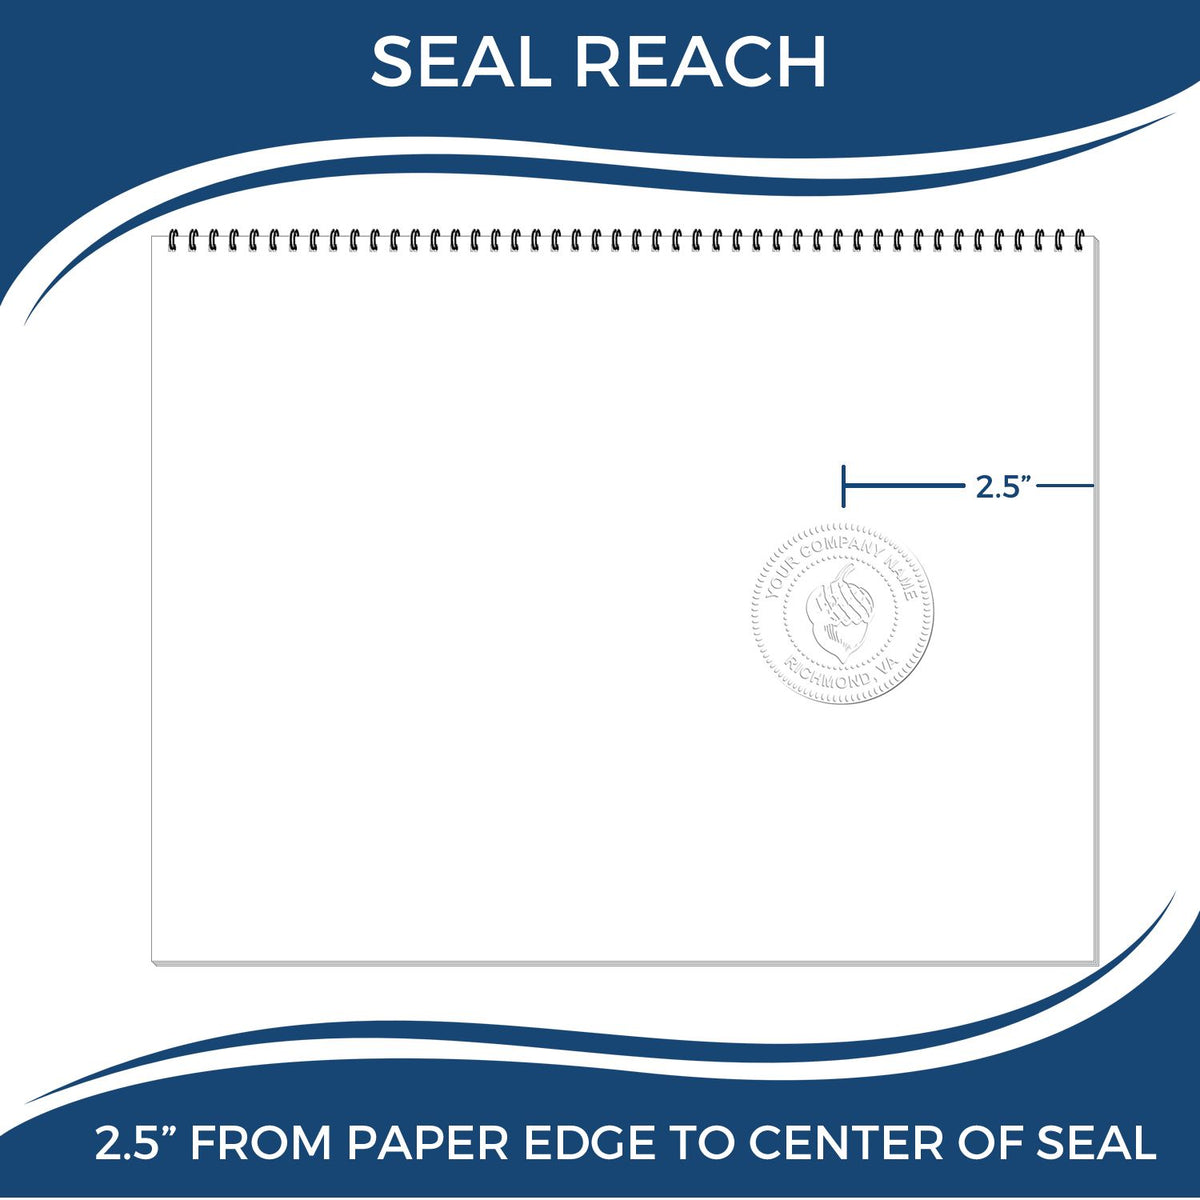 An infographic showing the seal reach which is represented by a ruler and a miniature seal image of the Heavy Duty Cast Iron Idaho Land Surveyor Seal Embosser